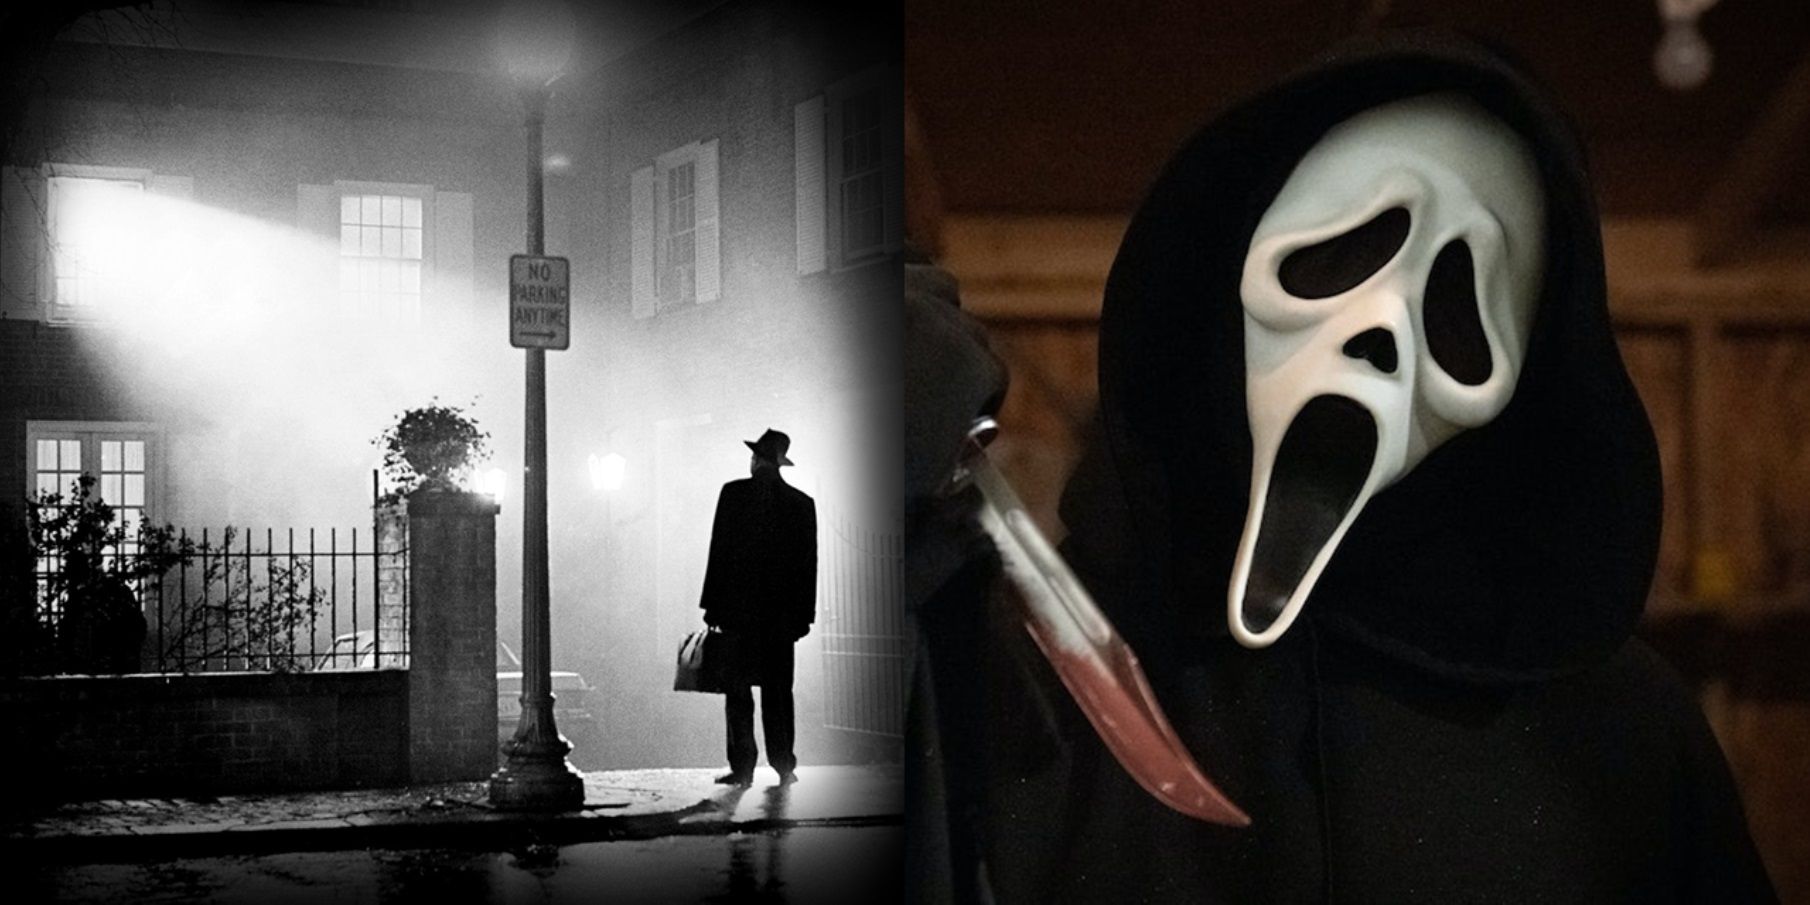 Split image of The Exorcist poster and Ghostface with a knife in Scream